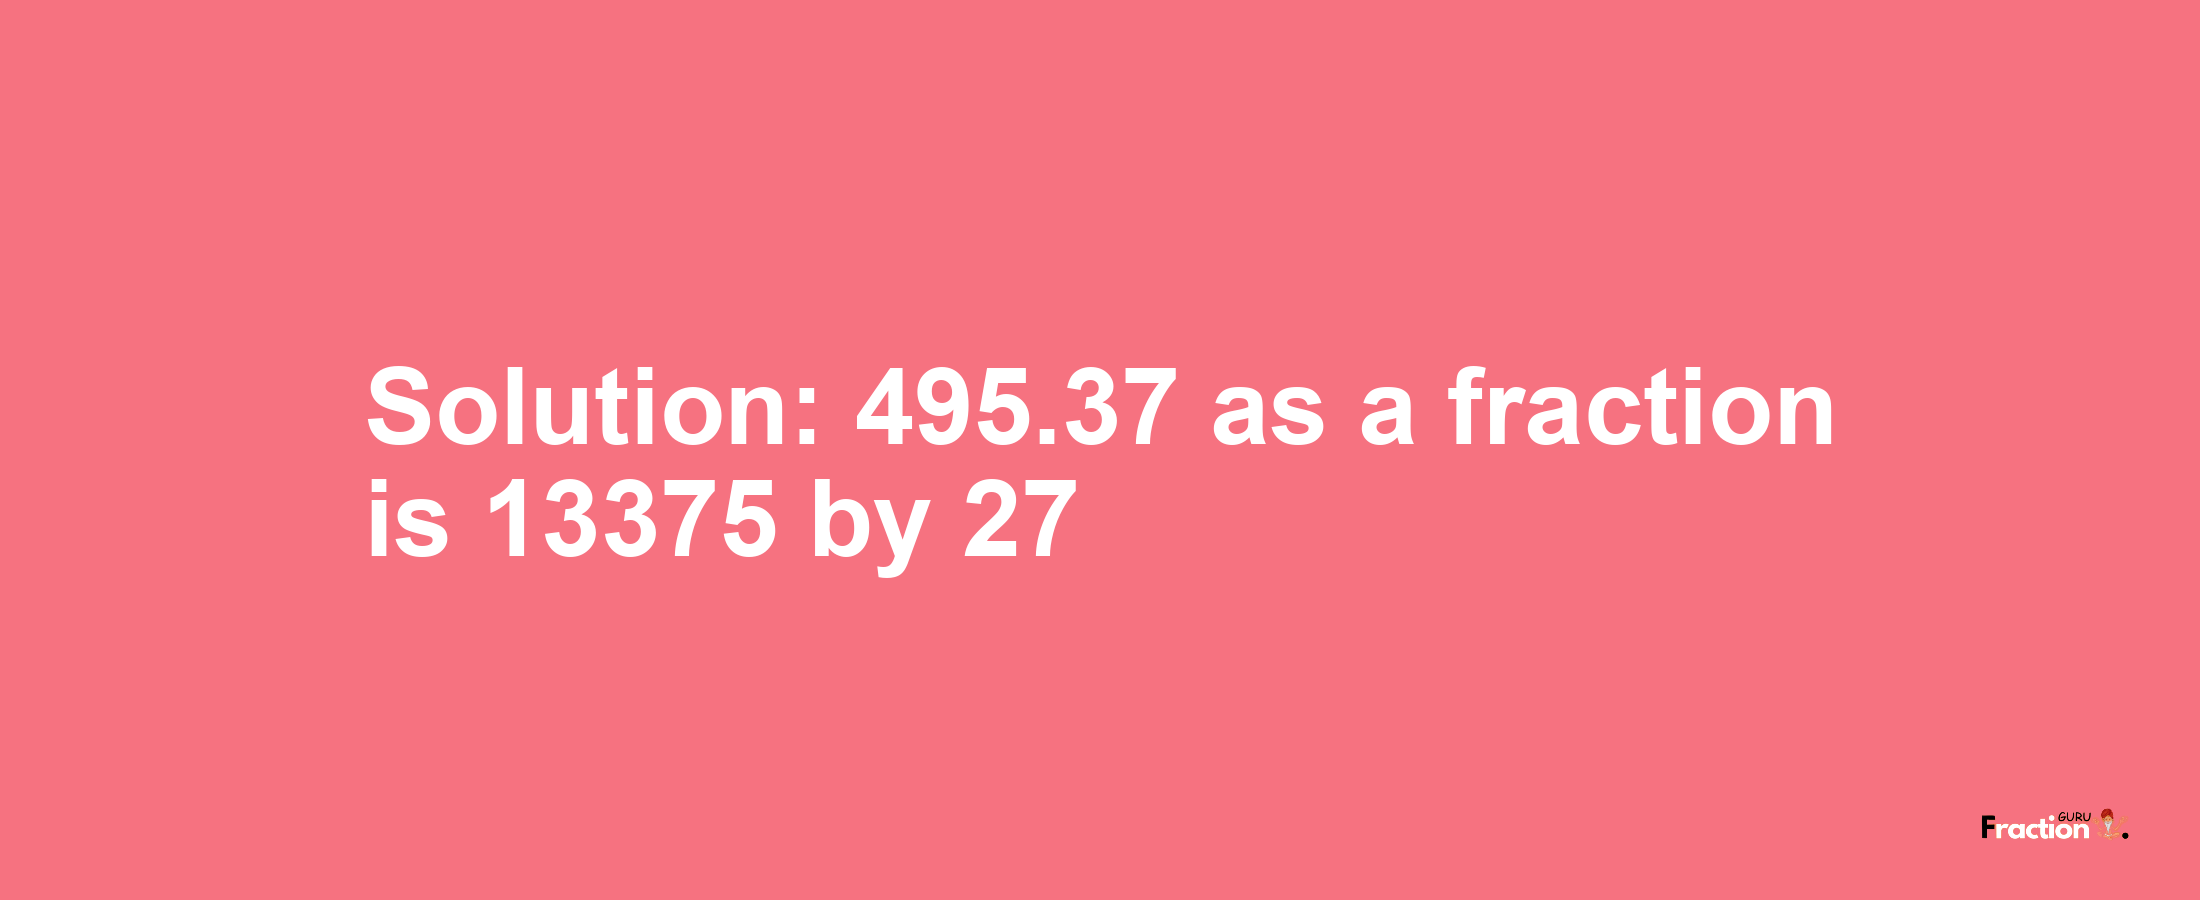 Solution:495.37 as a fraction is 13375/27